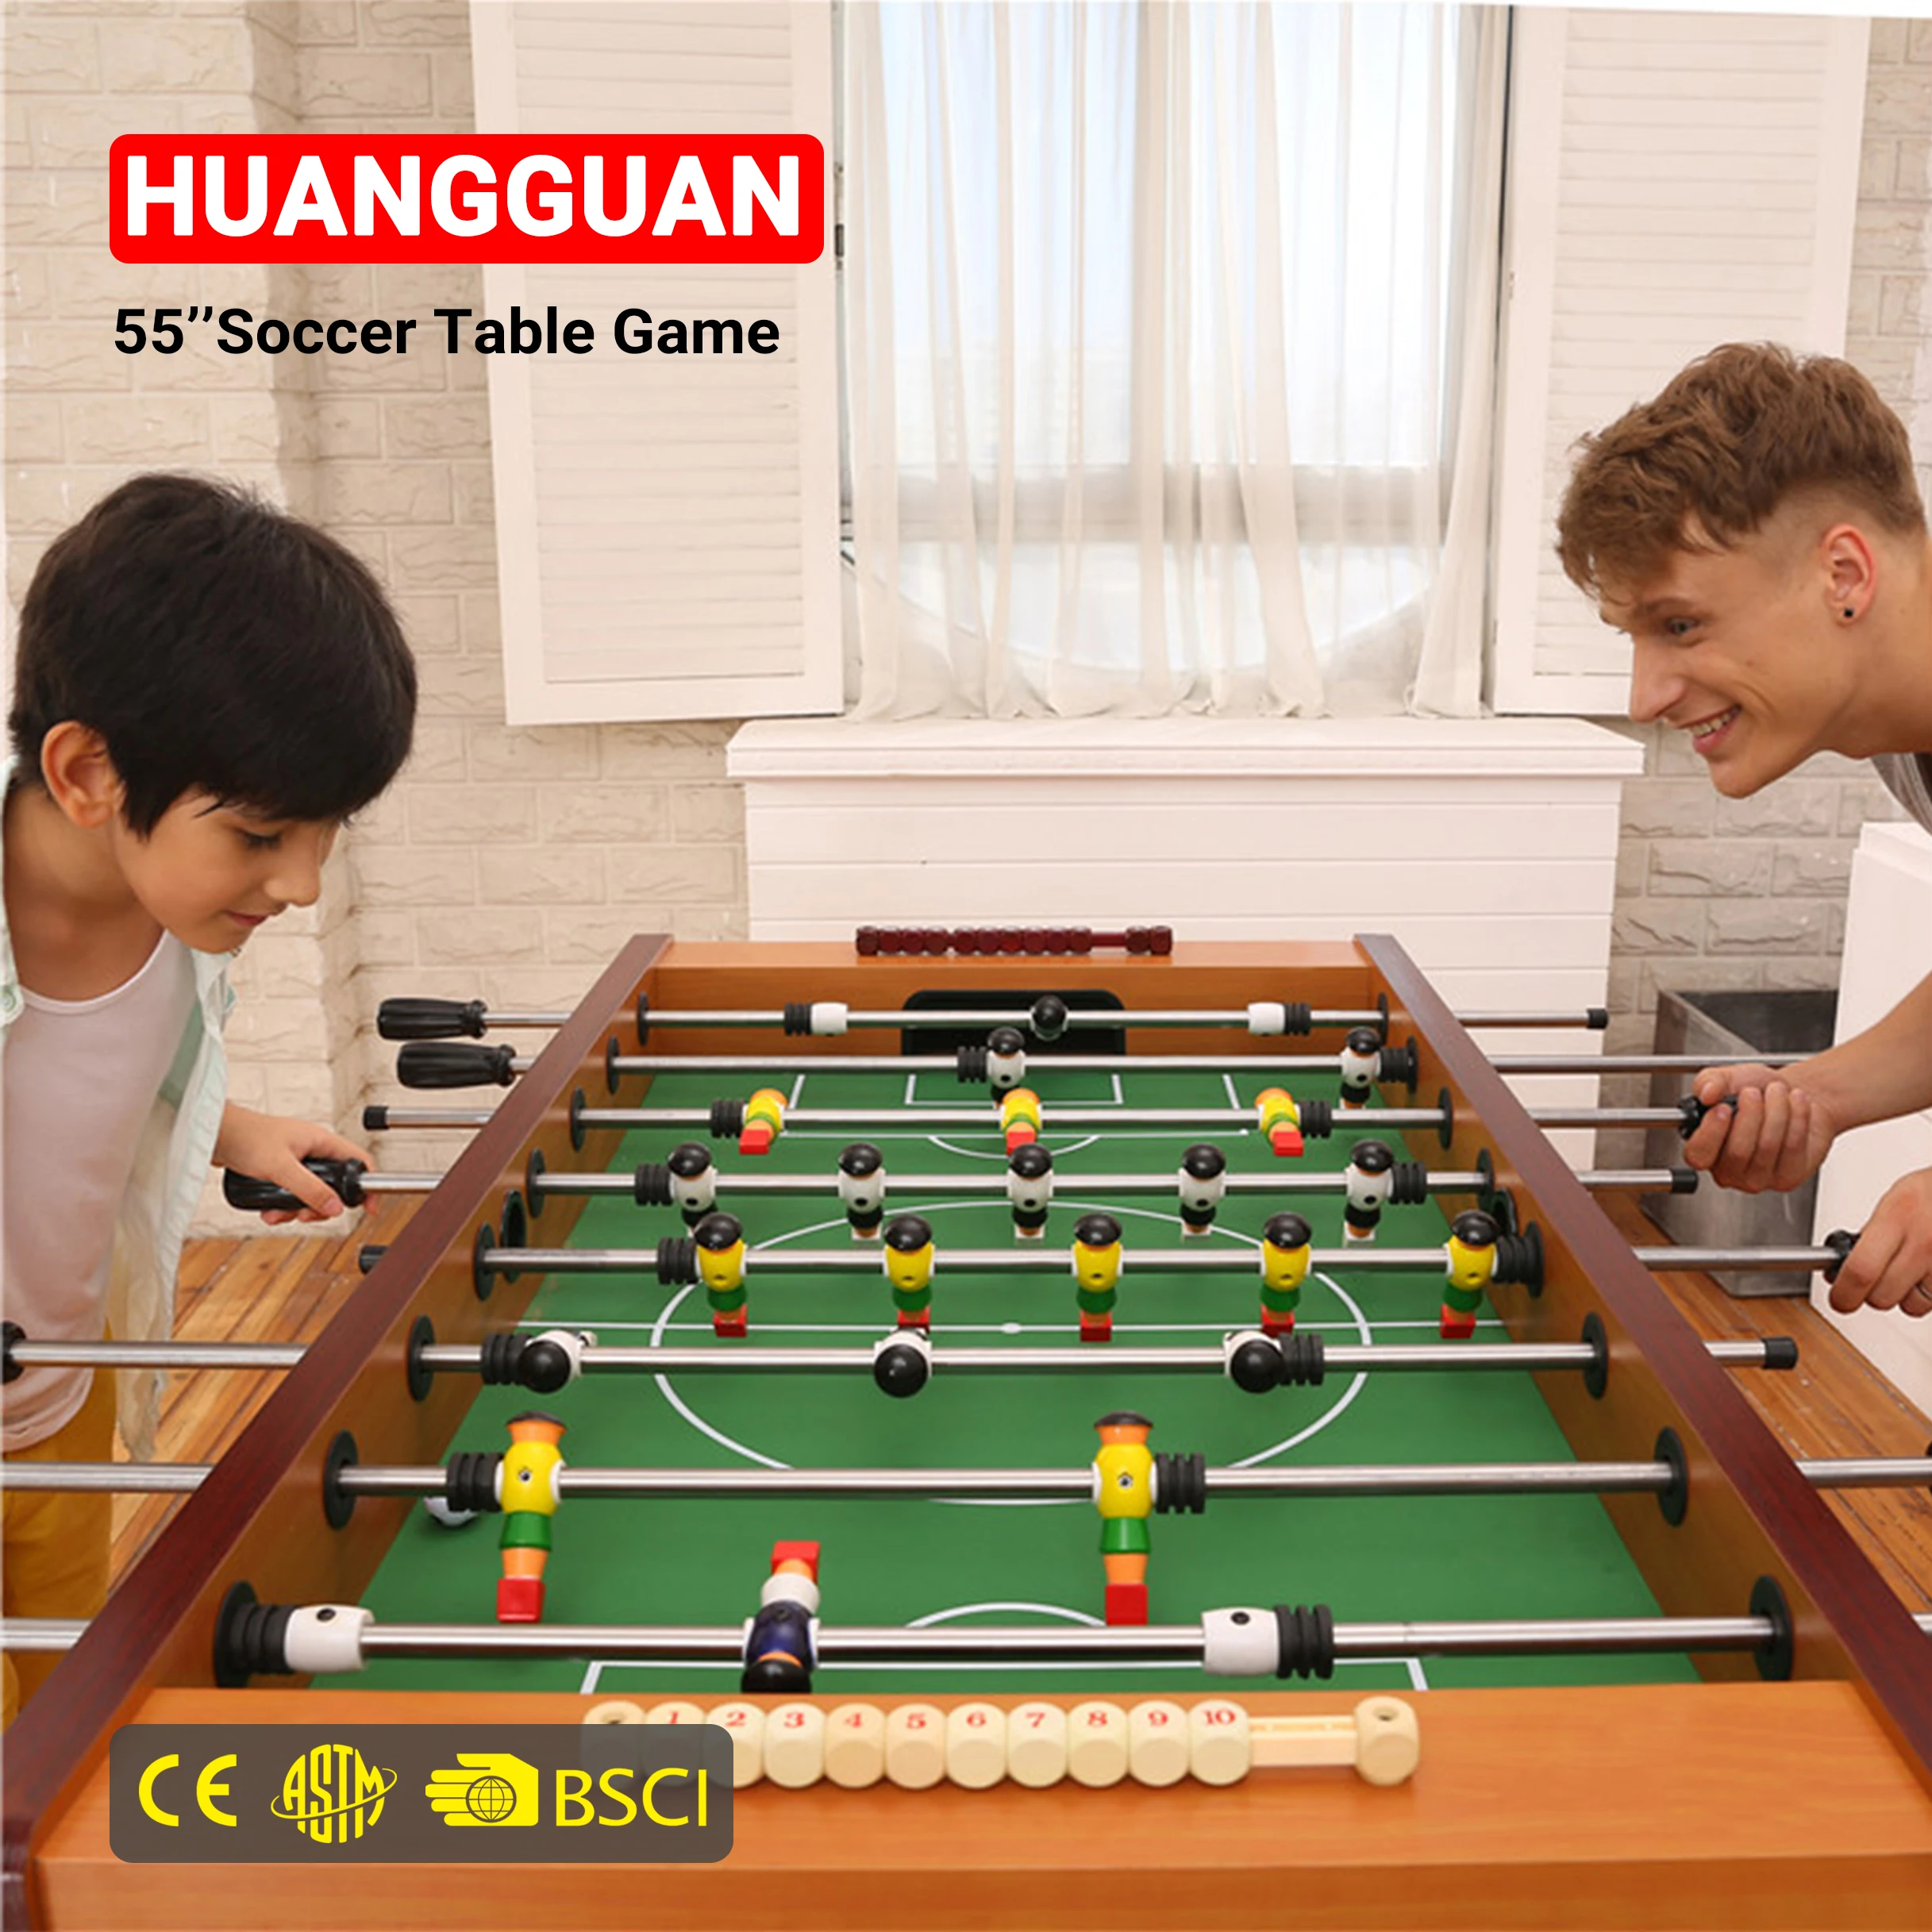 

Huangguan Football Table Game 55 Inch Soccer Game Table Professional Factory Wholesale Foosball Game Table For Adults